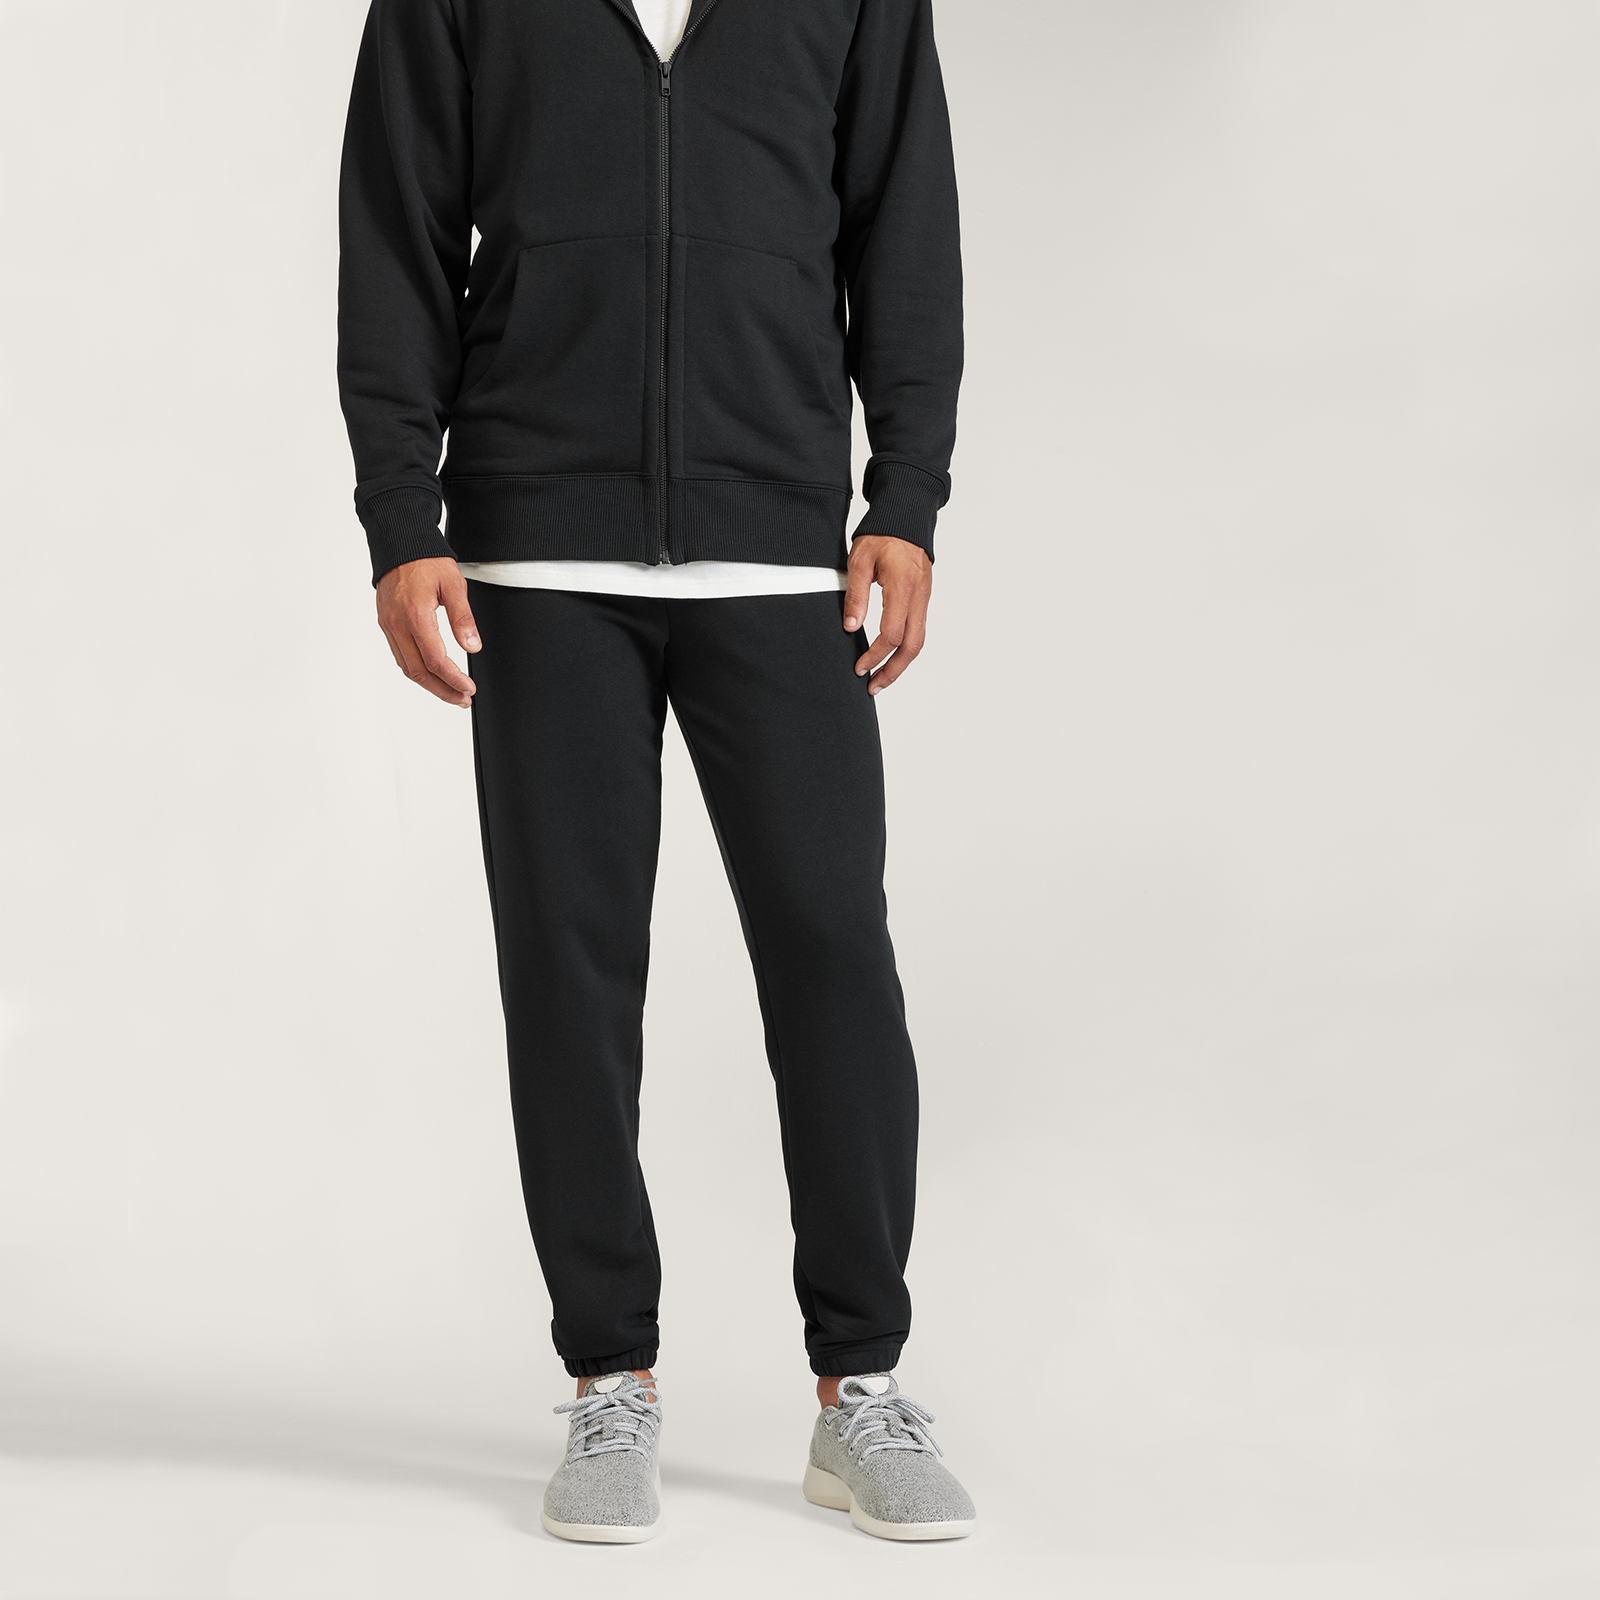 Allbirds Men's Clothing - Shirts, Sweaters, Jackets & more